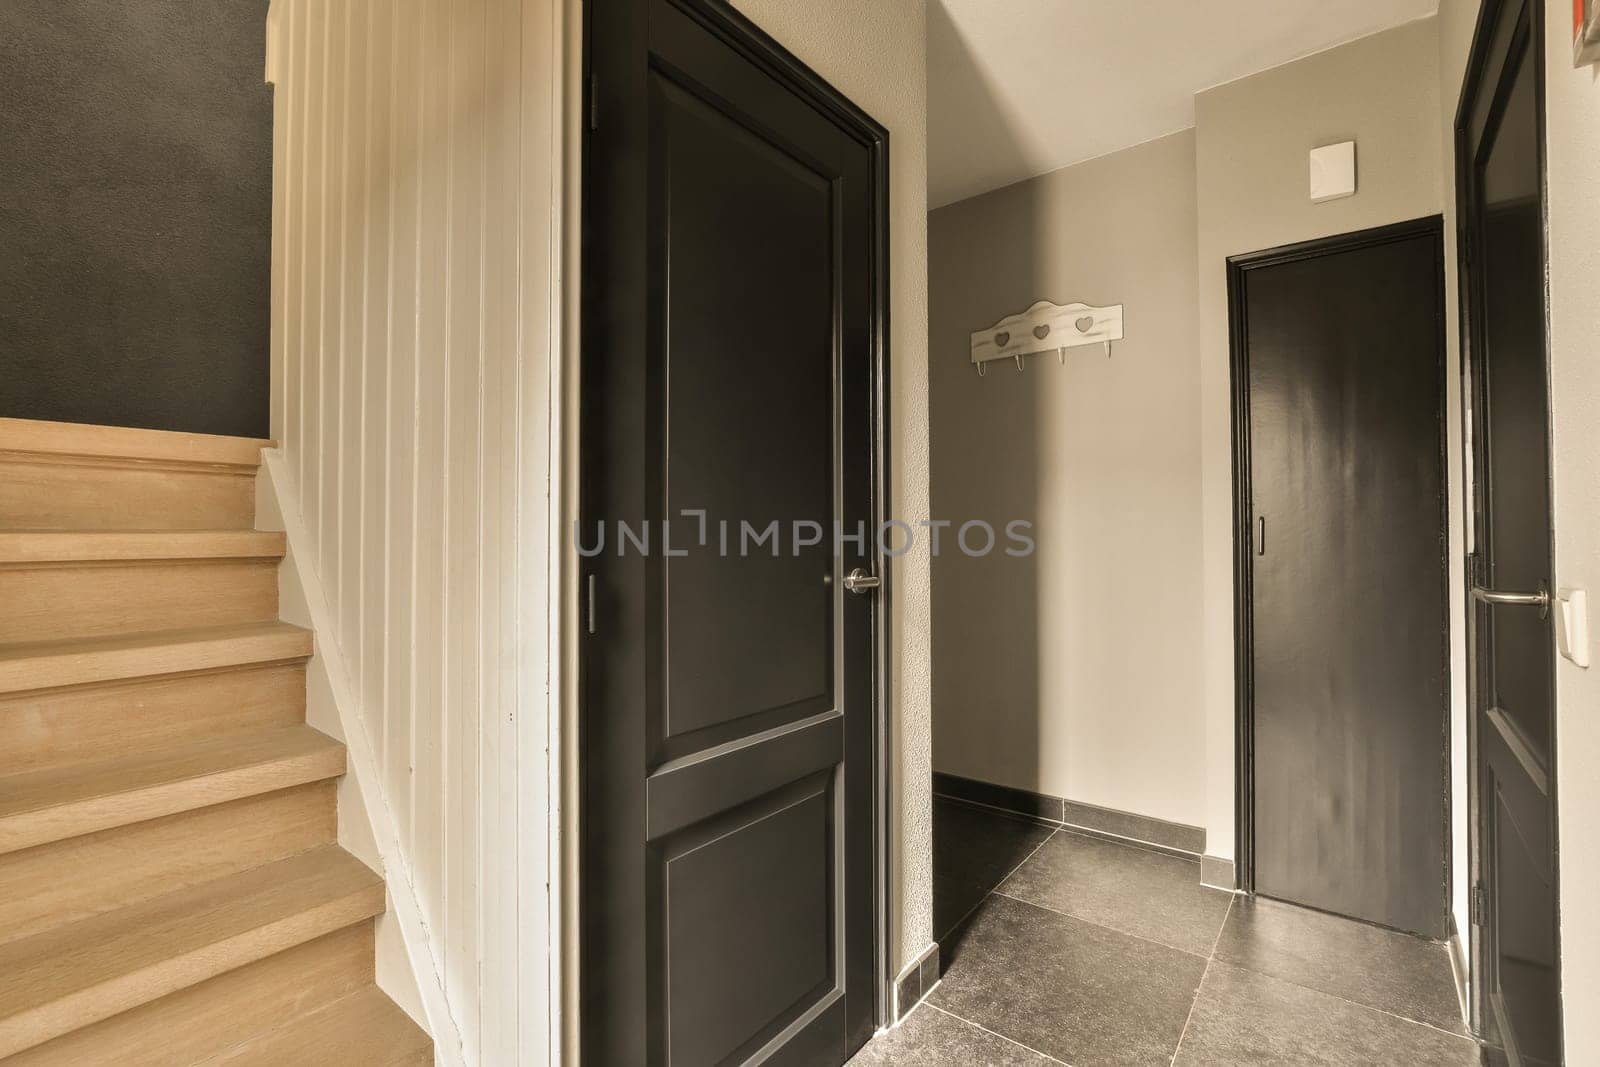 a view of a hallway with black doors and stairs by casamedia